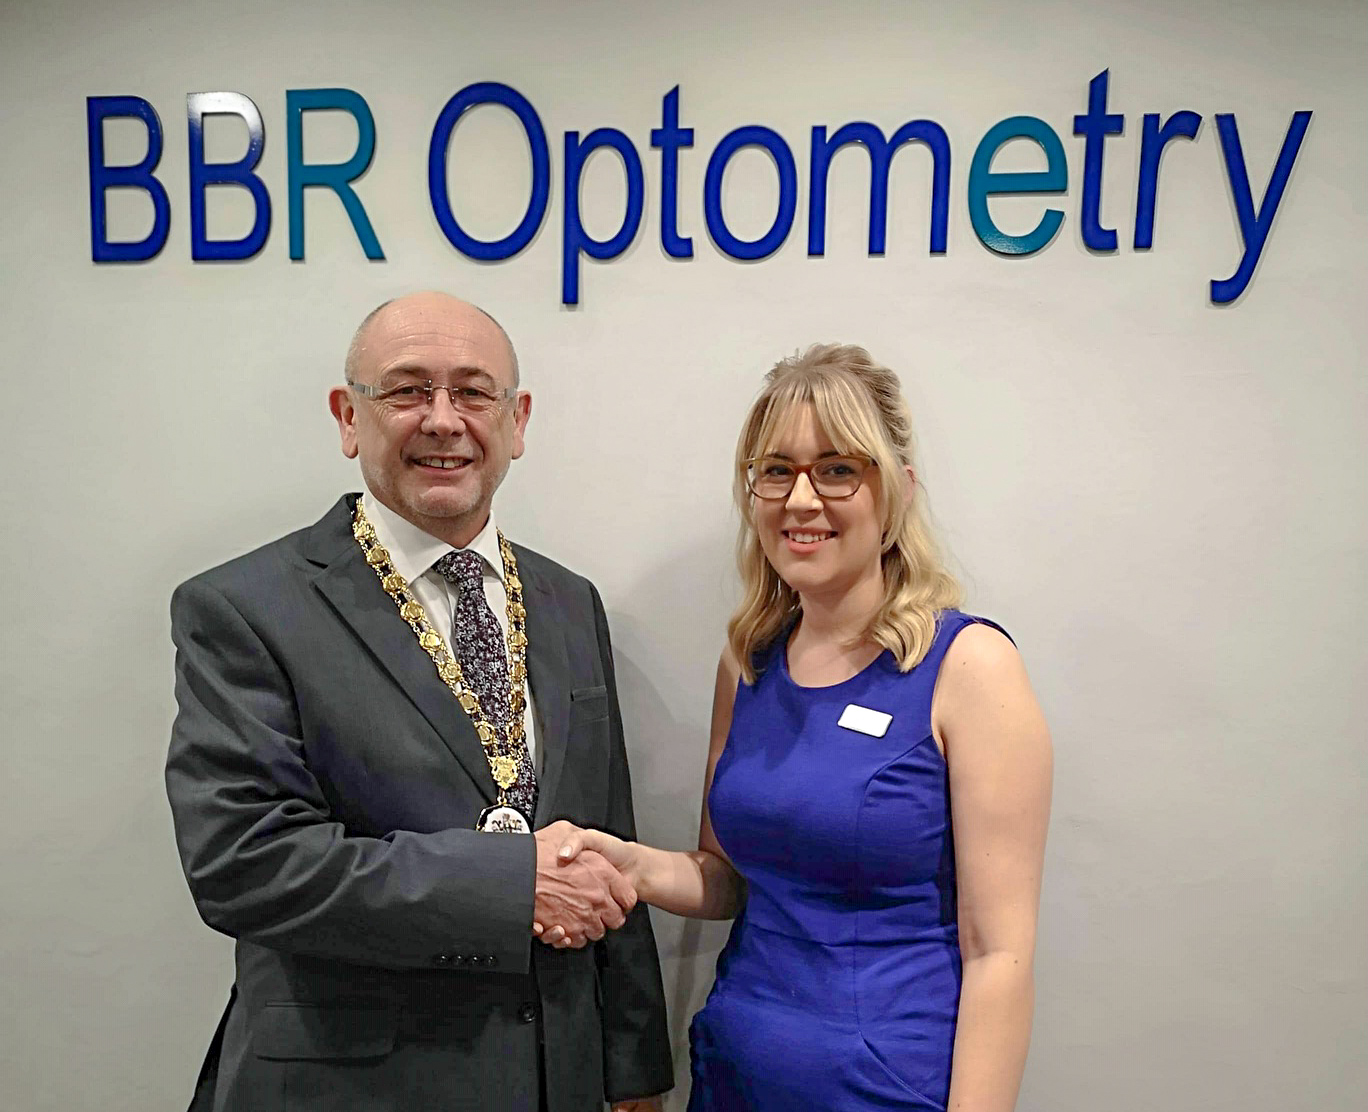 President of ABDO makes personal visit to present BBR Optometry’s Emily Davies with top award